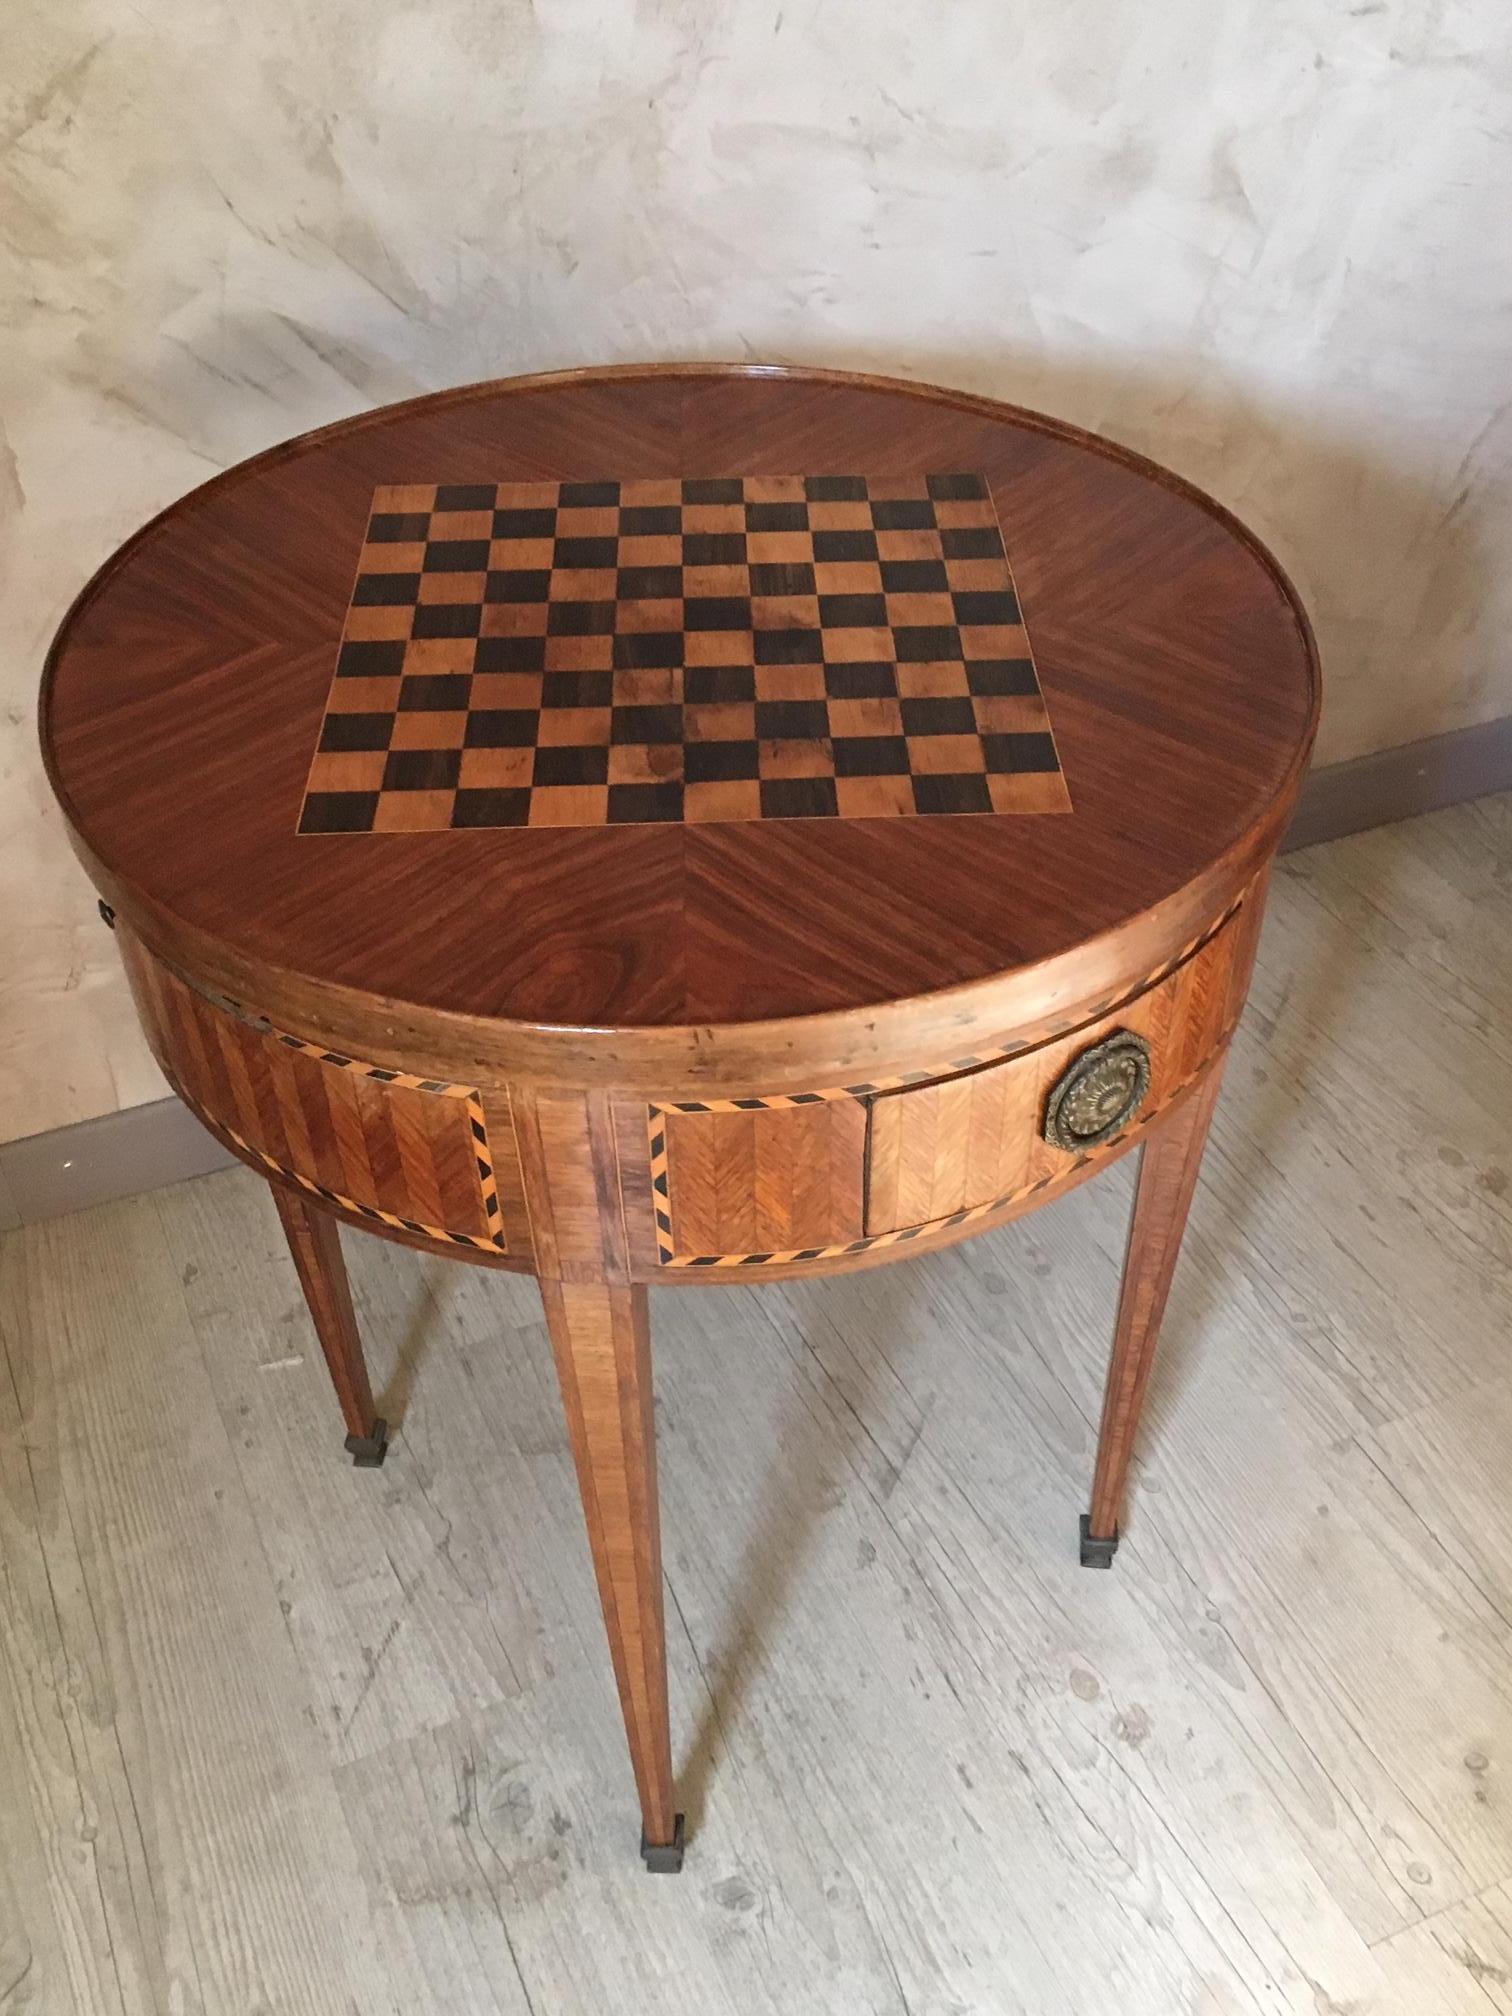 Exceptional and rare late 18th century Louis XVI period table with a beautiful marquetry landscape on the top. This top is removable and reversible and offer a perfect playing table on the other side.
Below, you will find a nice red leather that